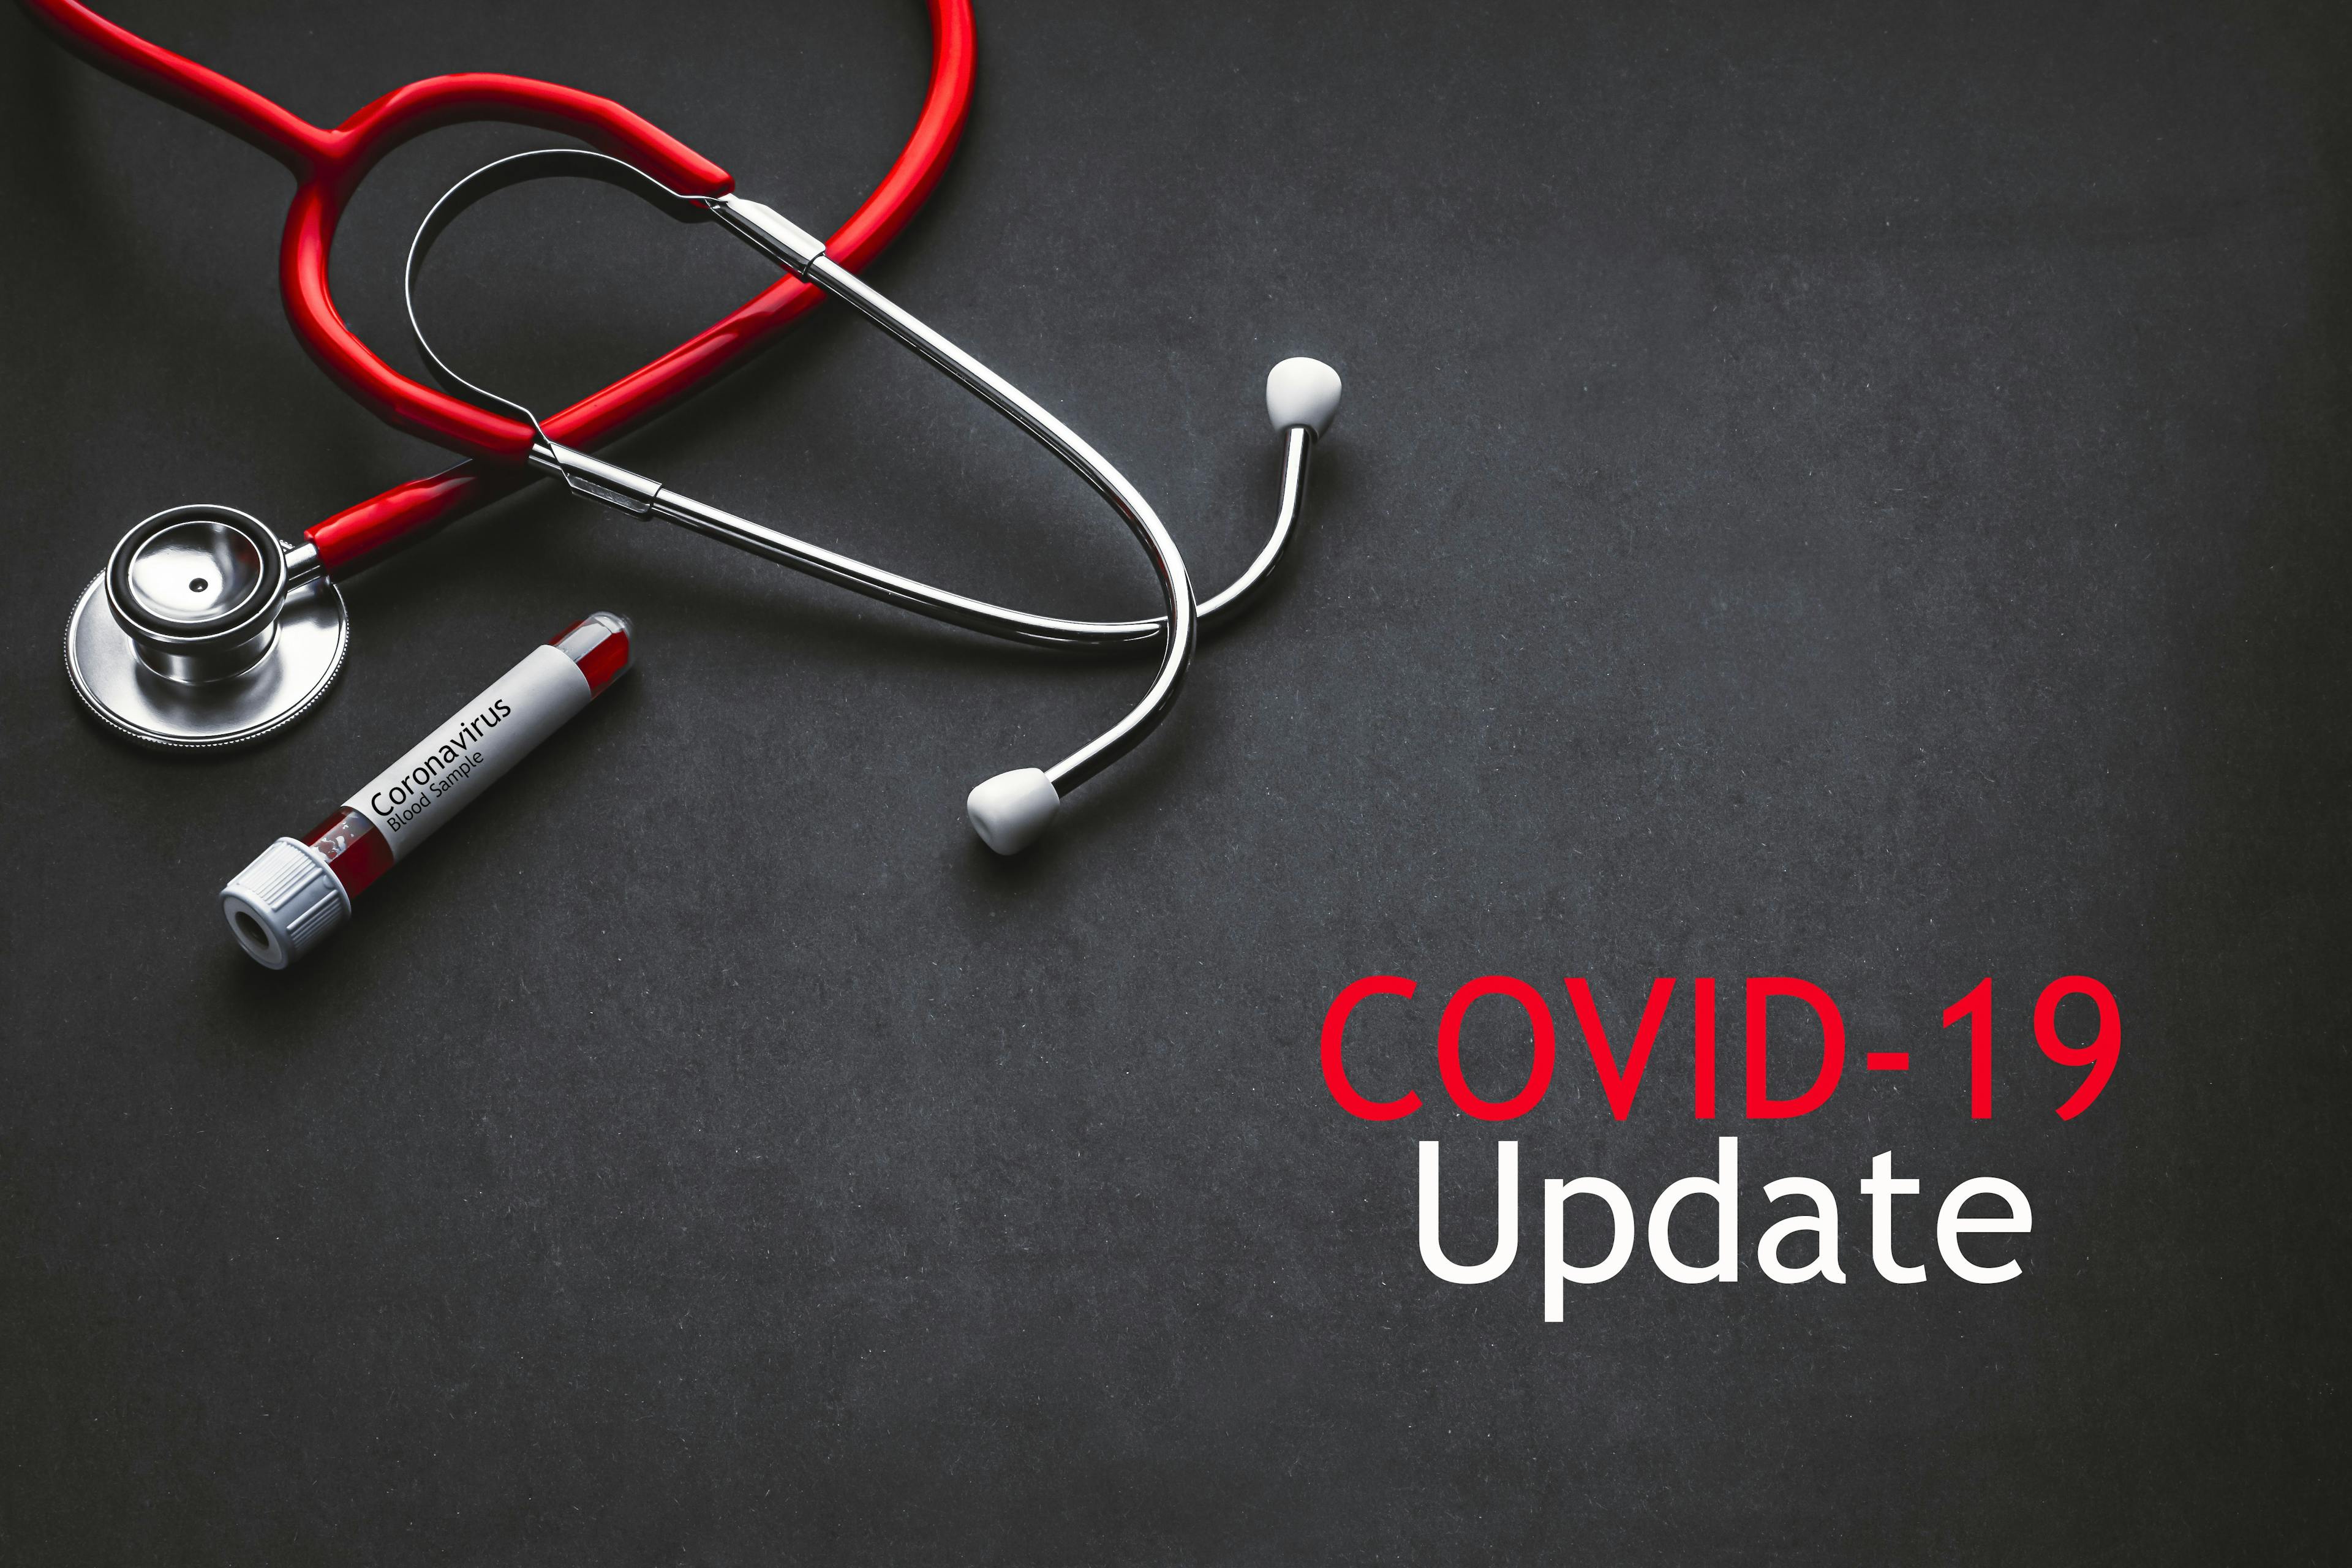 COVID-19 Update: US and Global Cases, Deaths, and Recoveries as of November 3, 2020